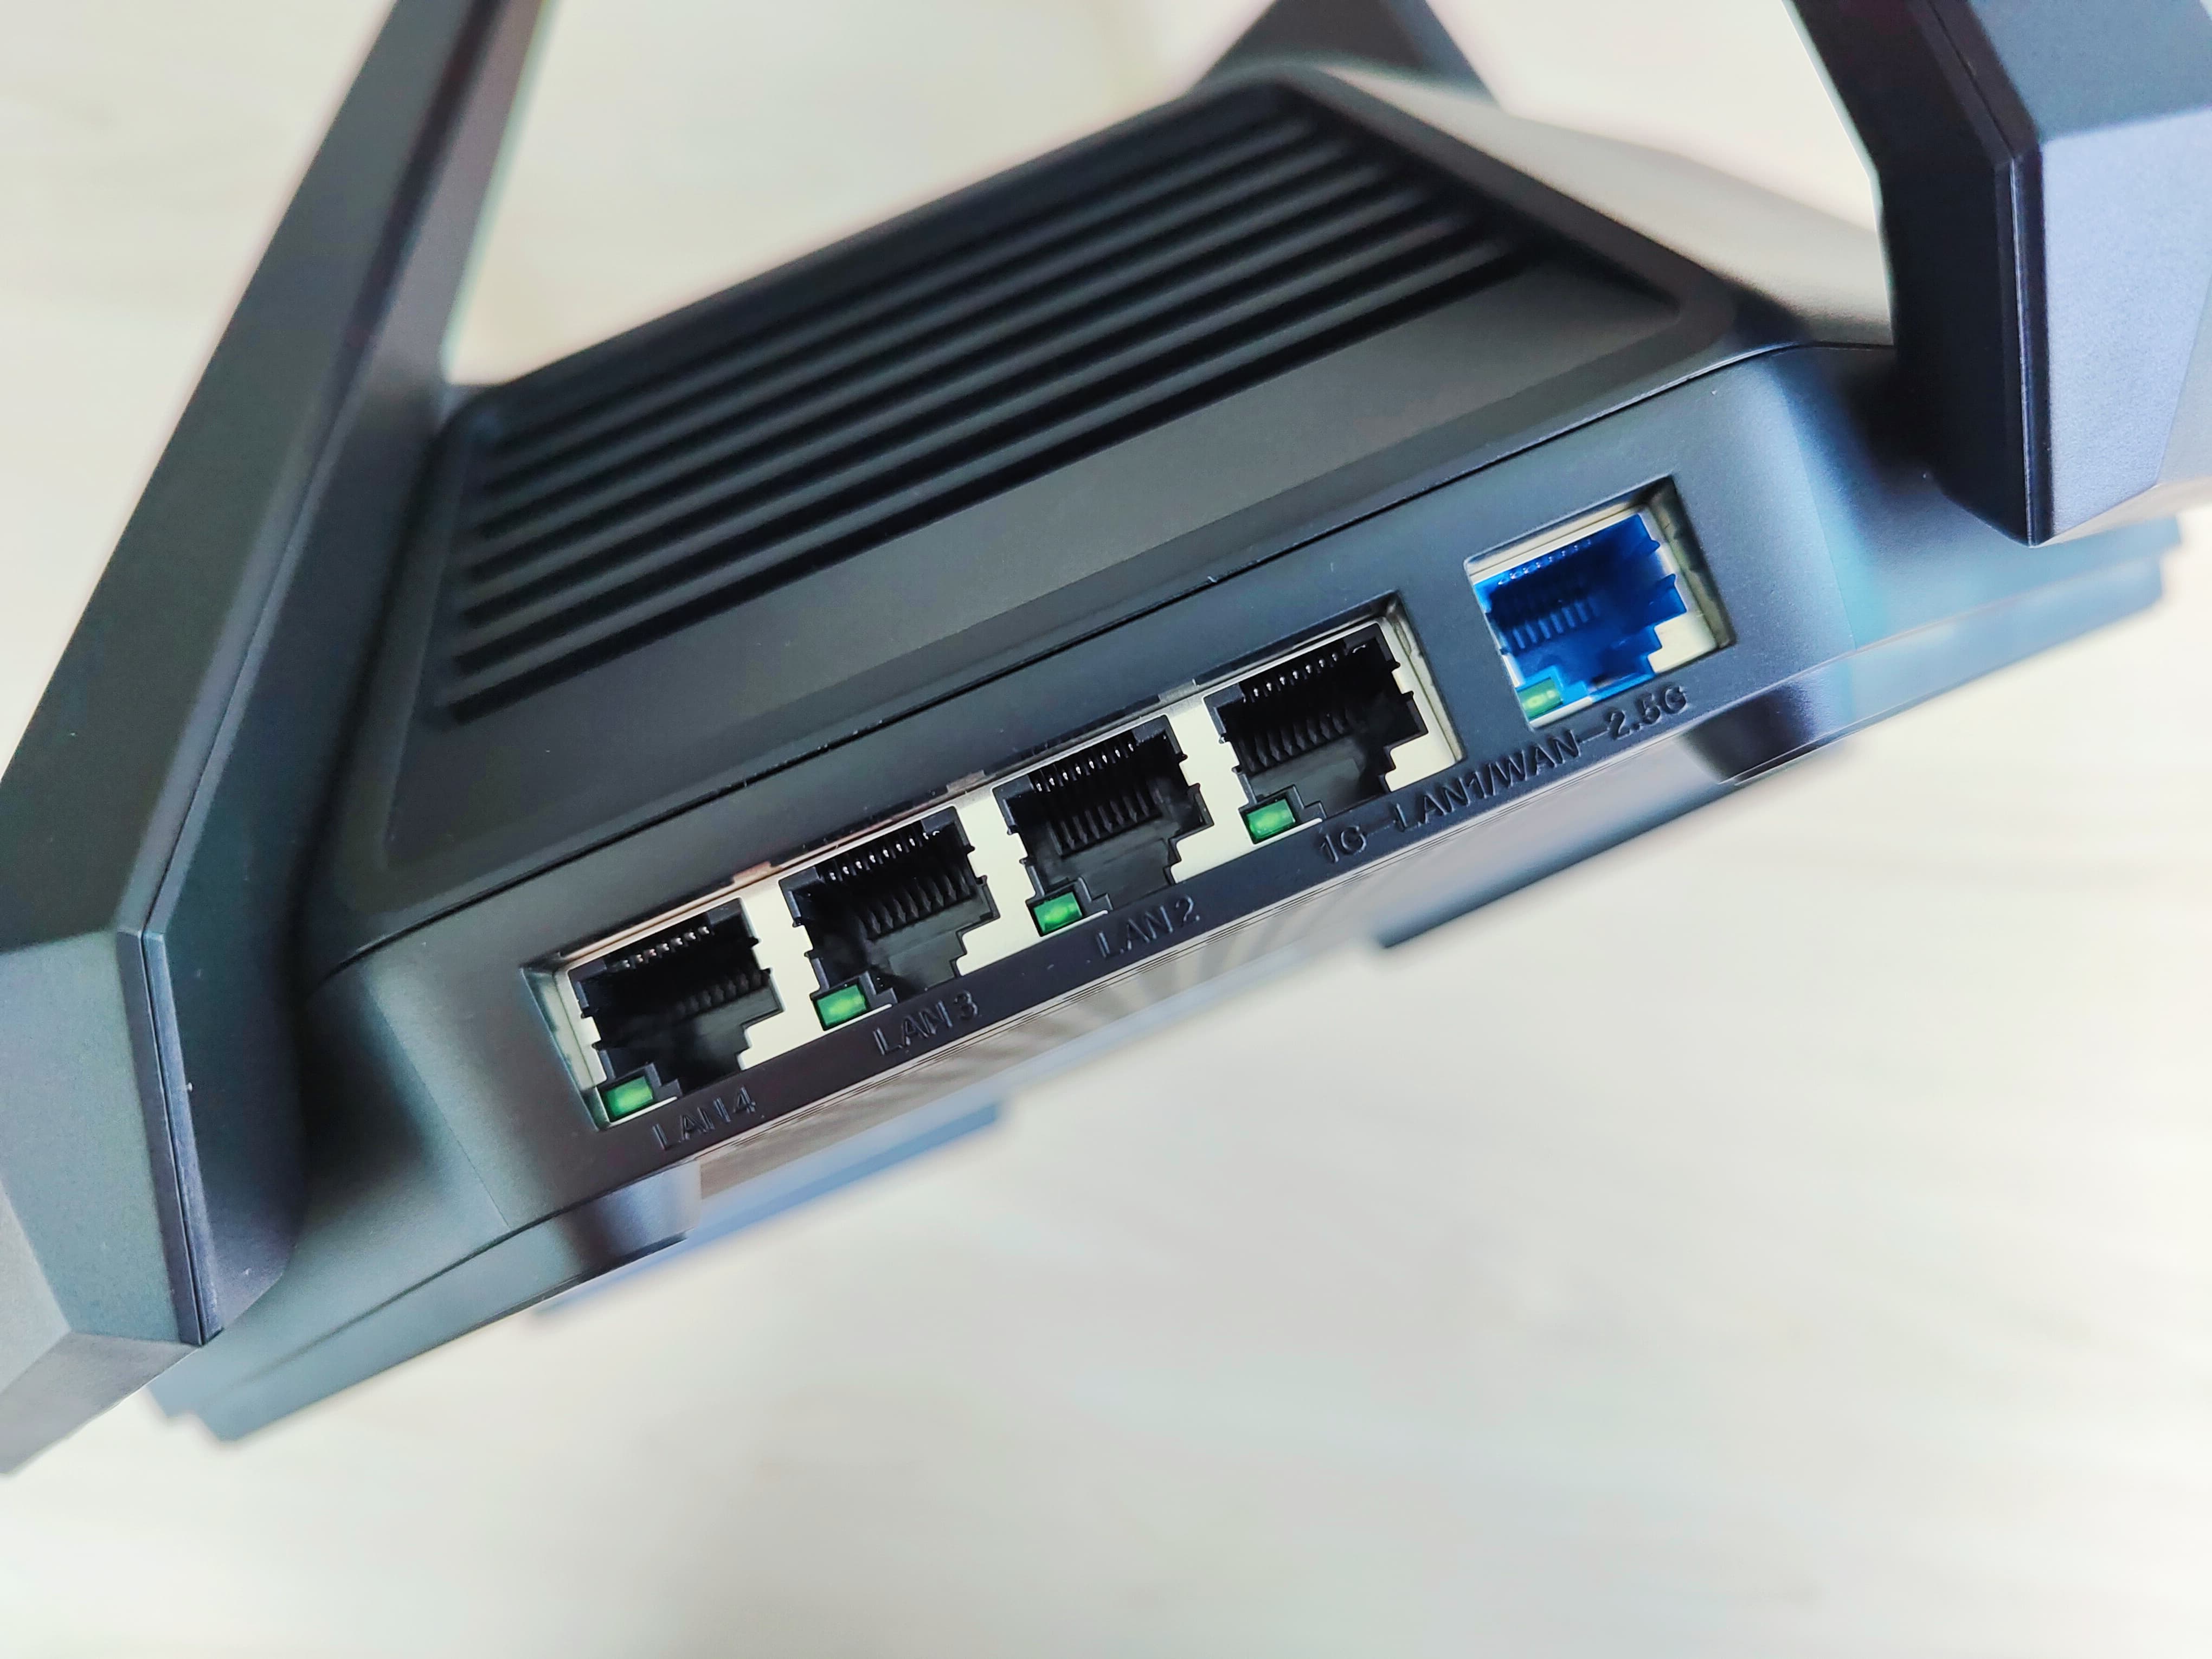 Xiaomi gaming router AX9000 Review: 999 yuan in one step